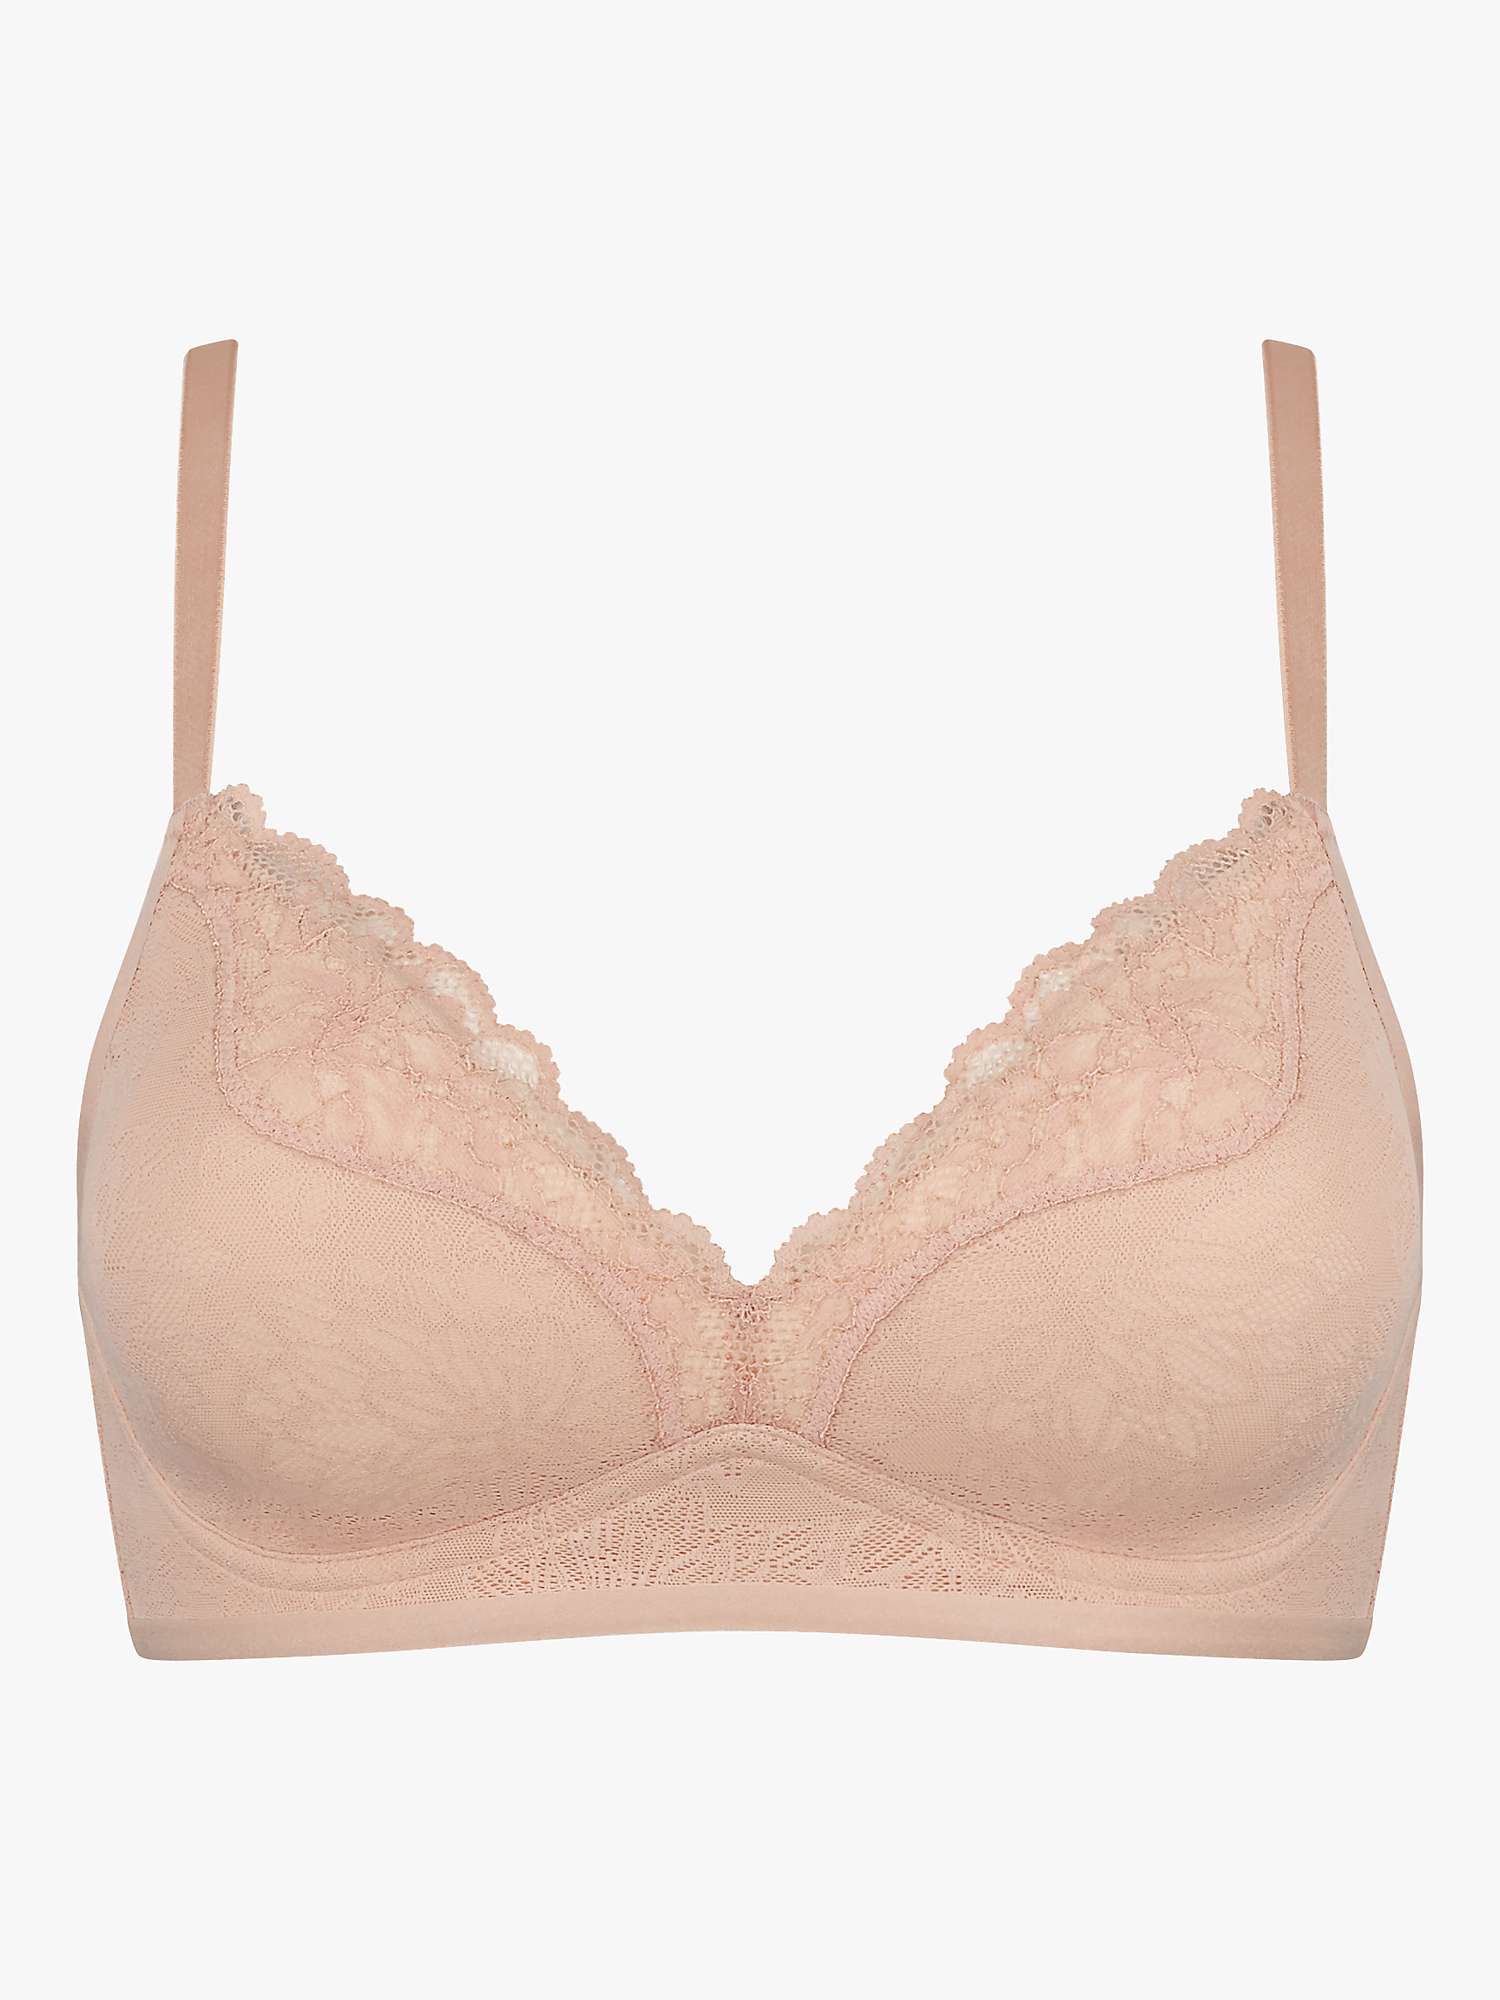 Buy Triumph Fit Smart Non Wired Bra Online at johnlewis.com